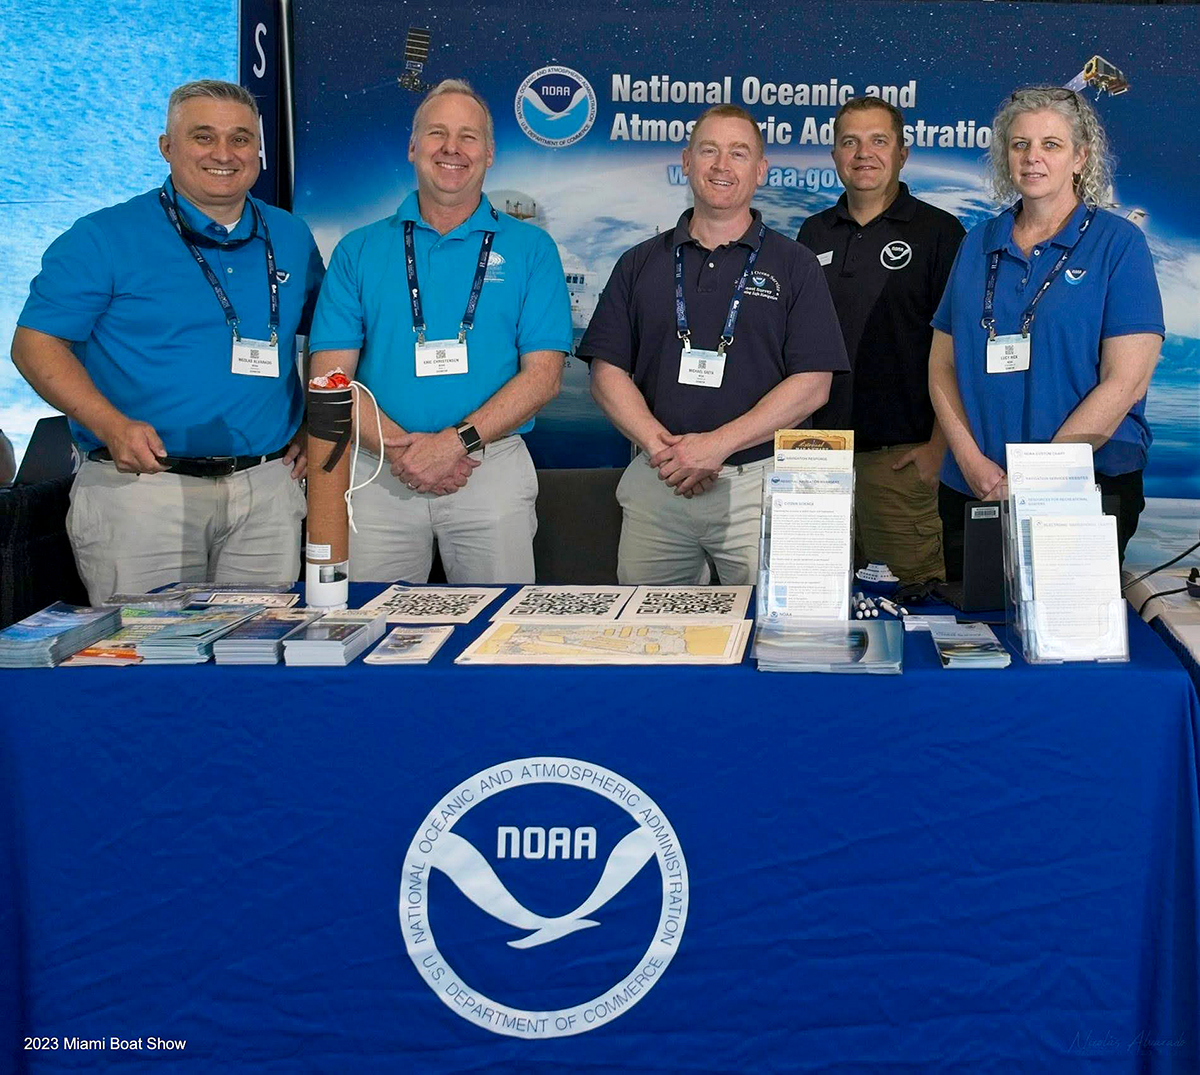 Coast Survey emplyees and the booth at the 2023 Miami Boast Show. From left to right are: Nicolás Alvarado, Eric Christensen (NWS), Michael Gaeta, Kyle Ward, and Lucy Hick.